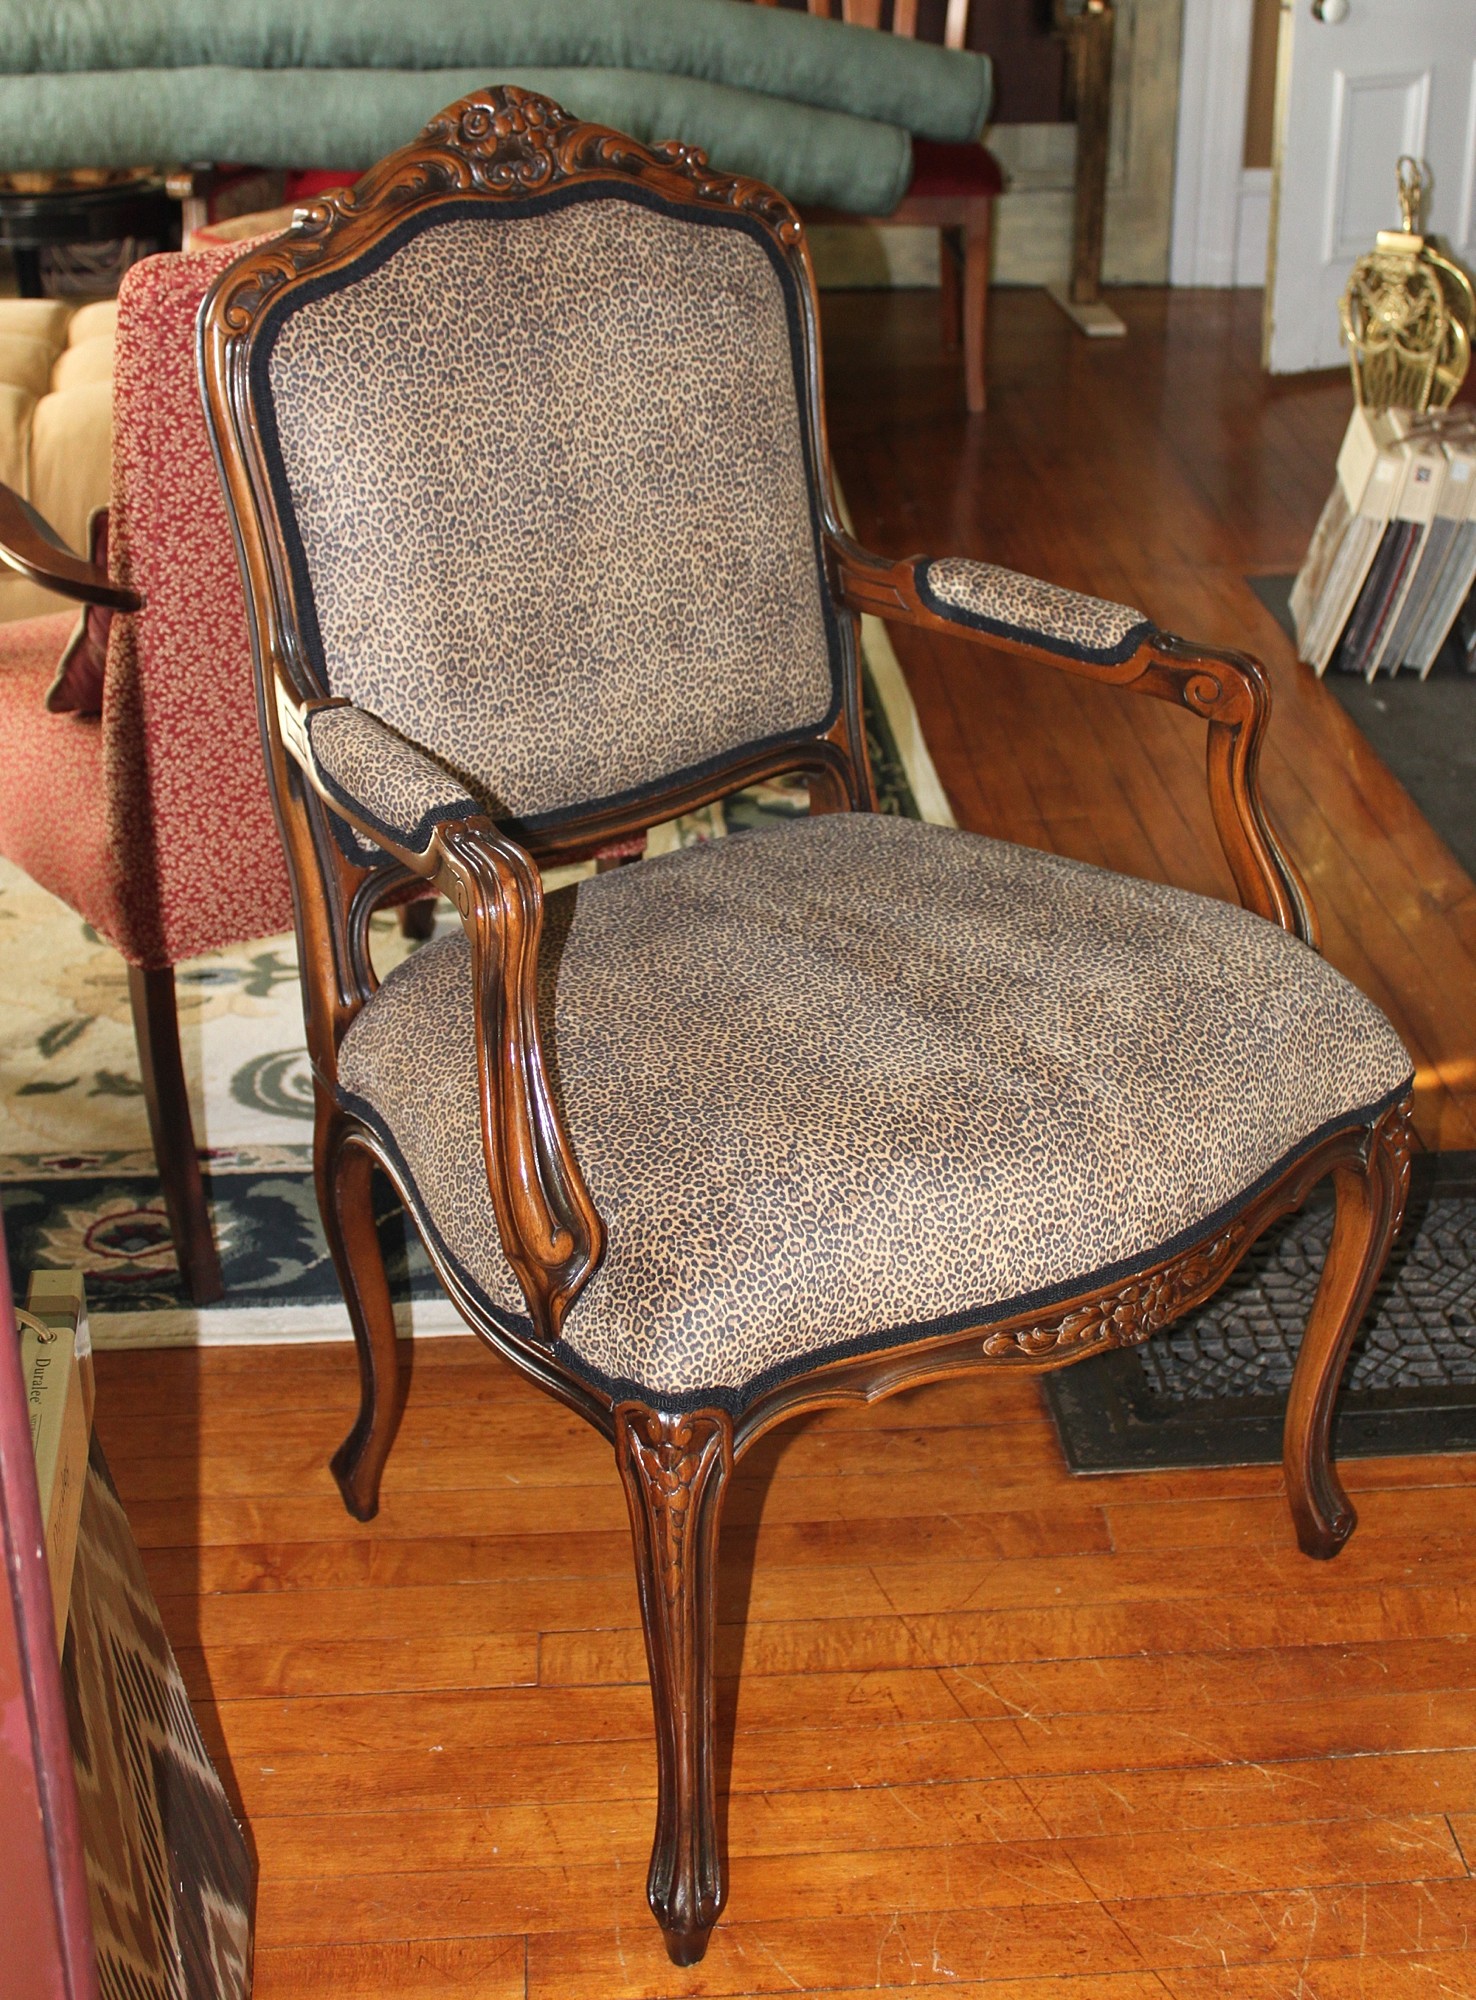 4 tips to get started on your first upholstery chair